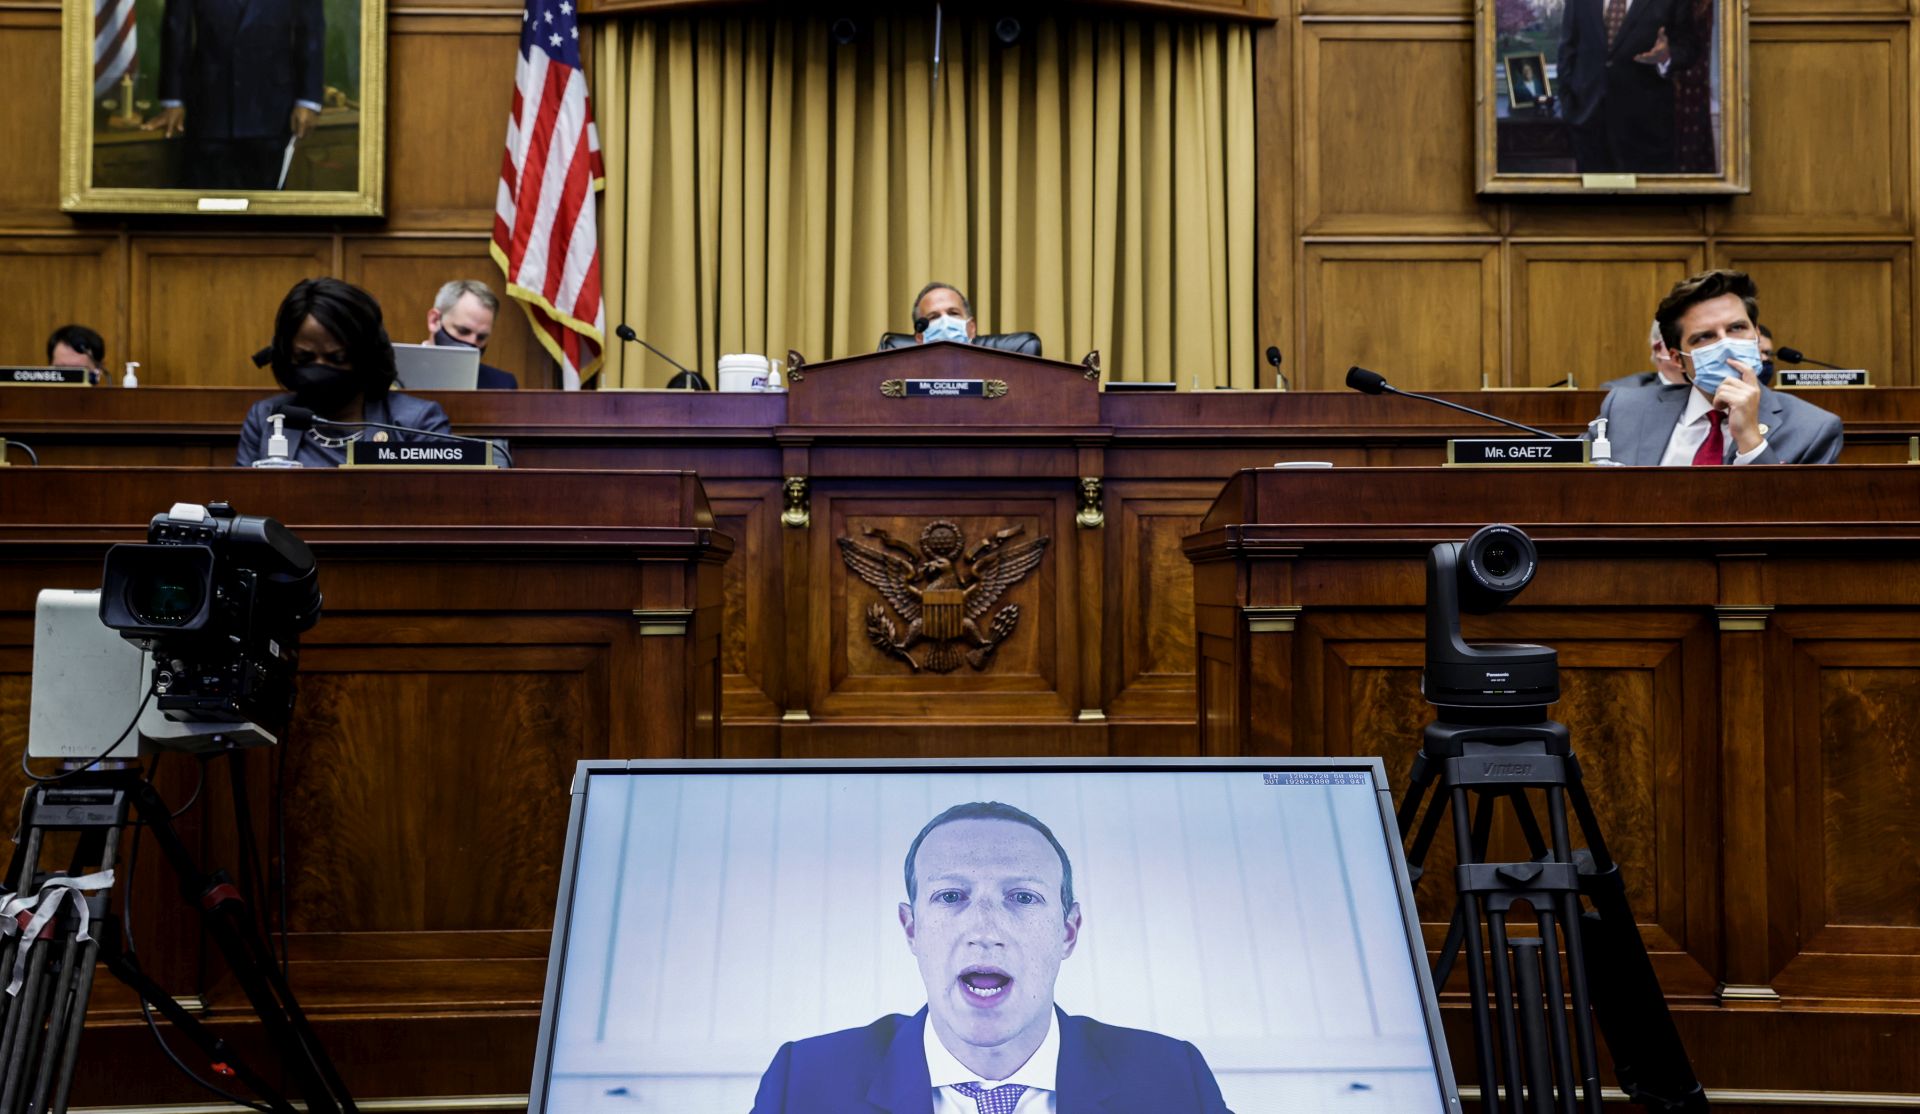 epa08573160 Facebook CEO Mark Zuckerberg speaks via video conference during a House Judiciary Subcommittee on Antitrust, Commercial and Administrative Law on 'Online Platforms and Market Power' in the Rayburn House office Building on Capitol Hill in Washington, DC, USA, on 29 July 2020.  EPA/Graeme Jennings / POOL